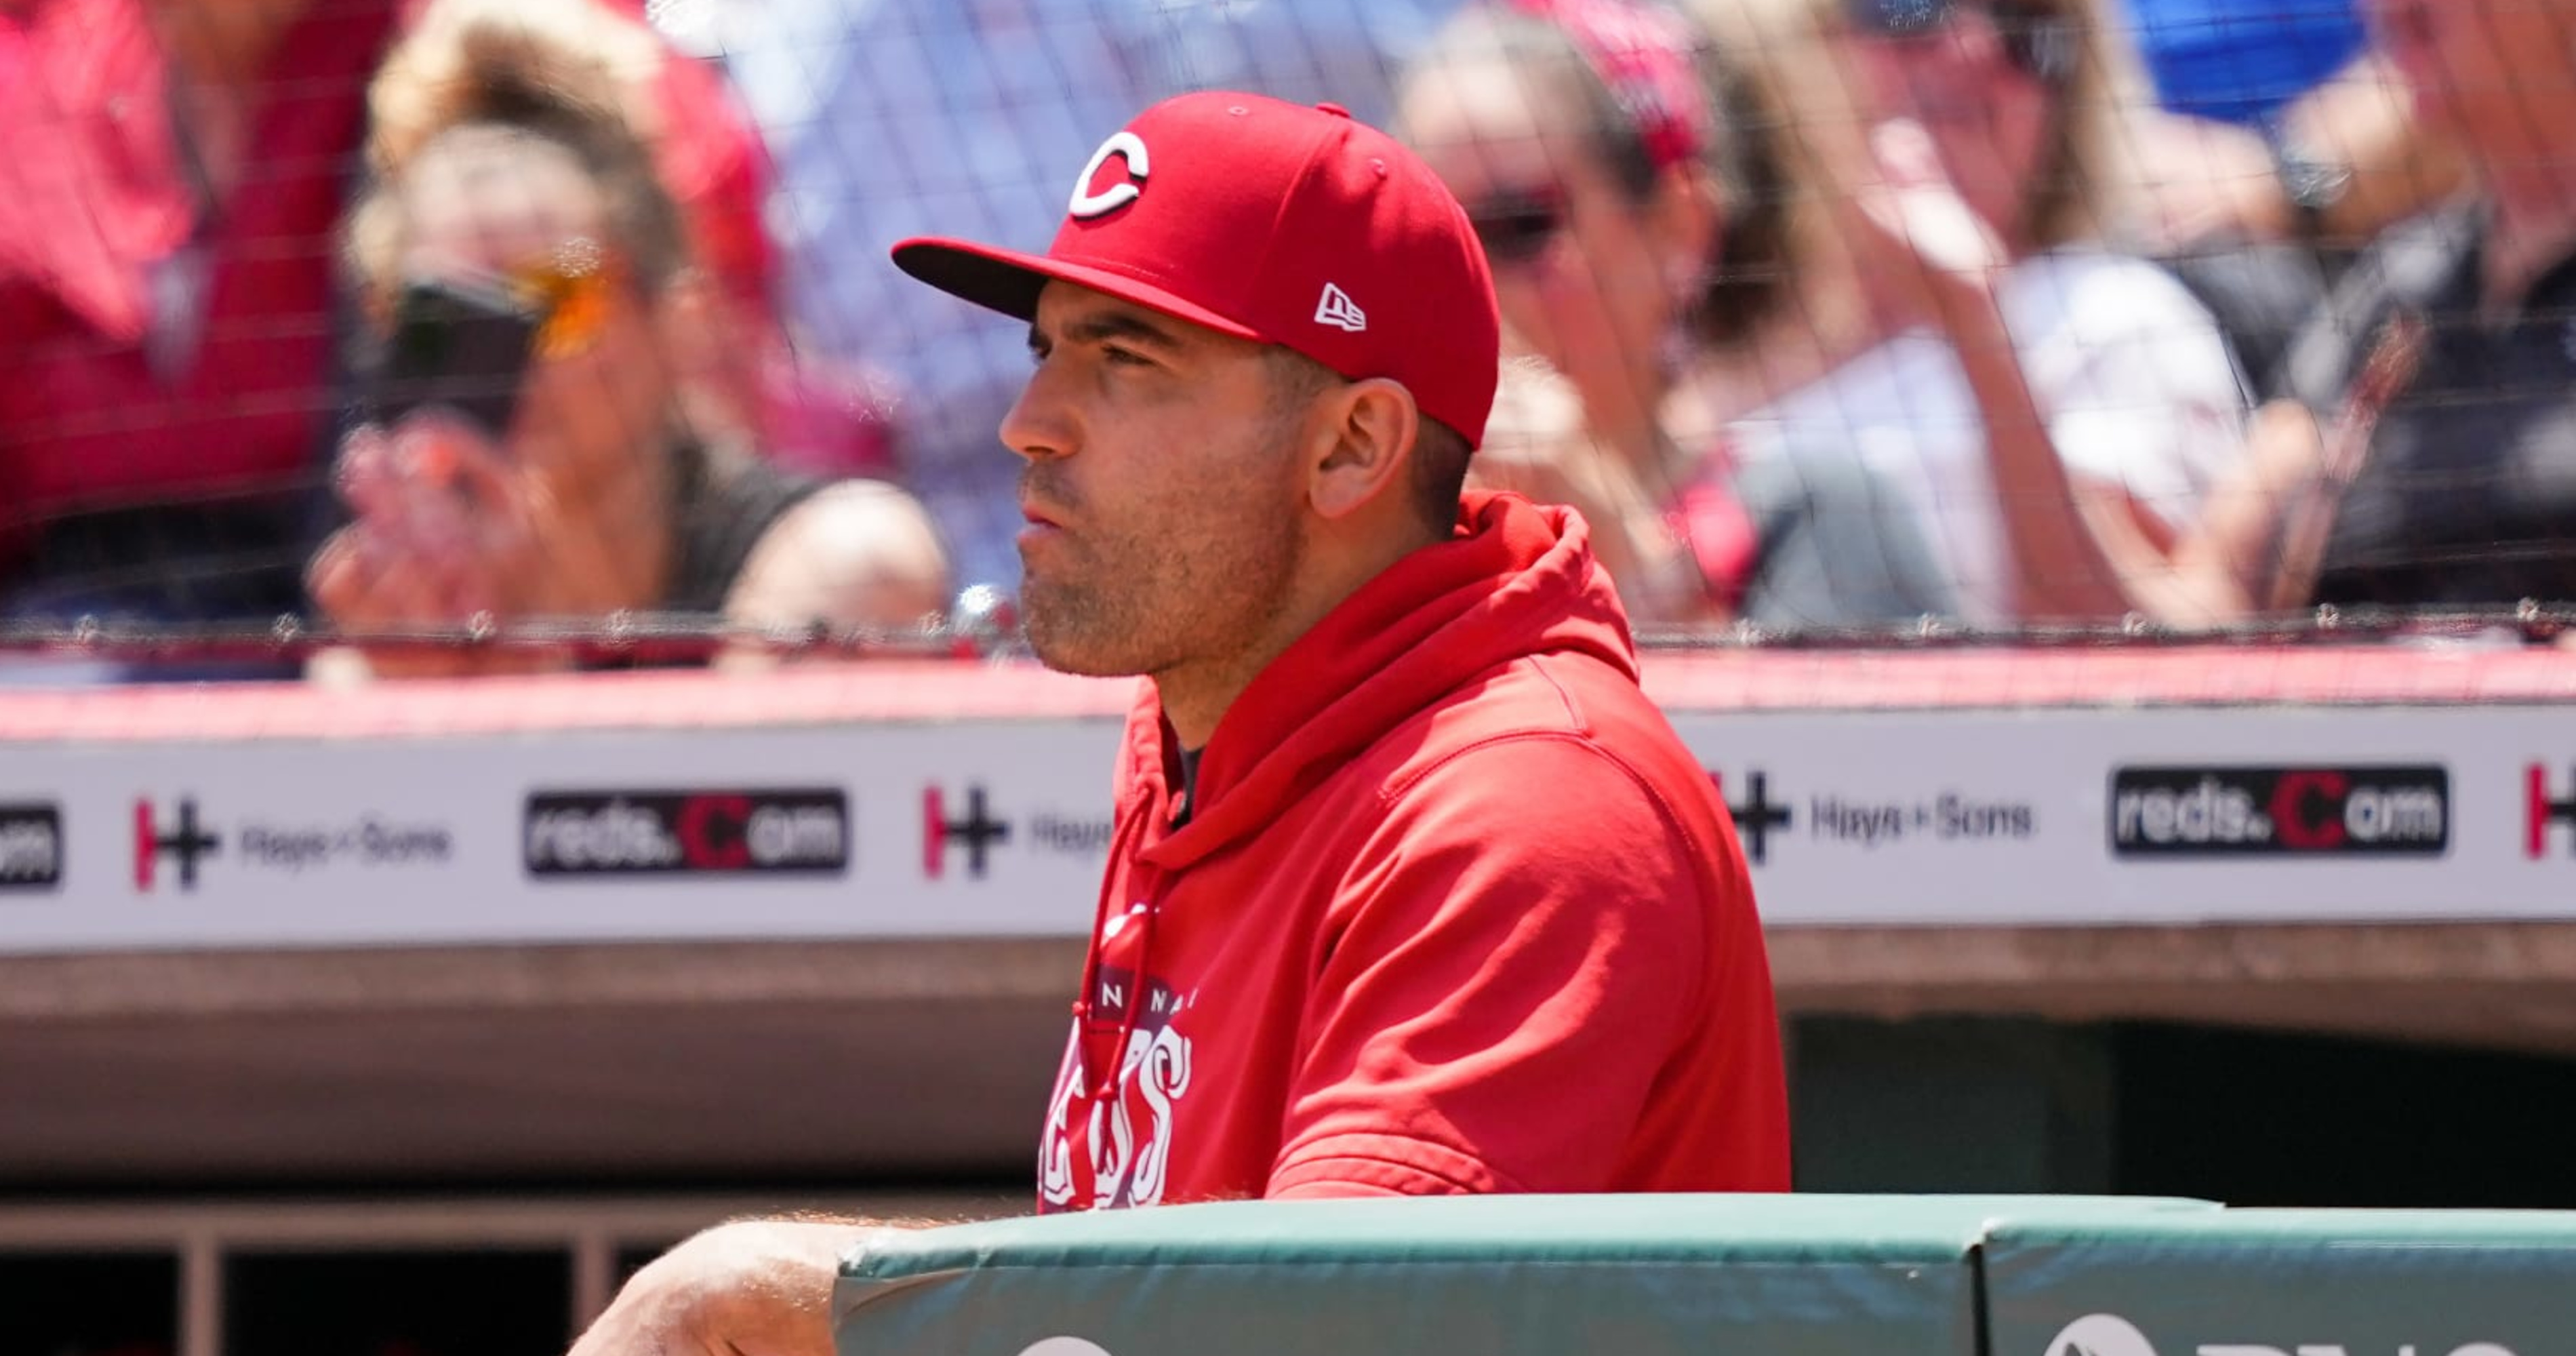 Reds' Joey Votto to Make Season Debut After Recovery from Shoulder ...